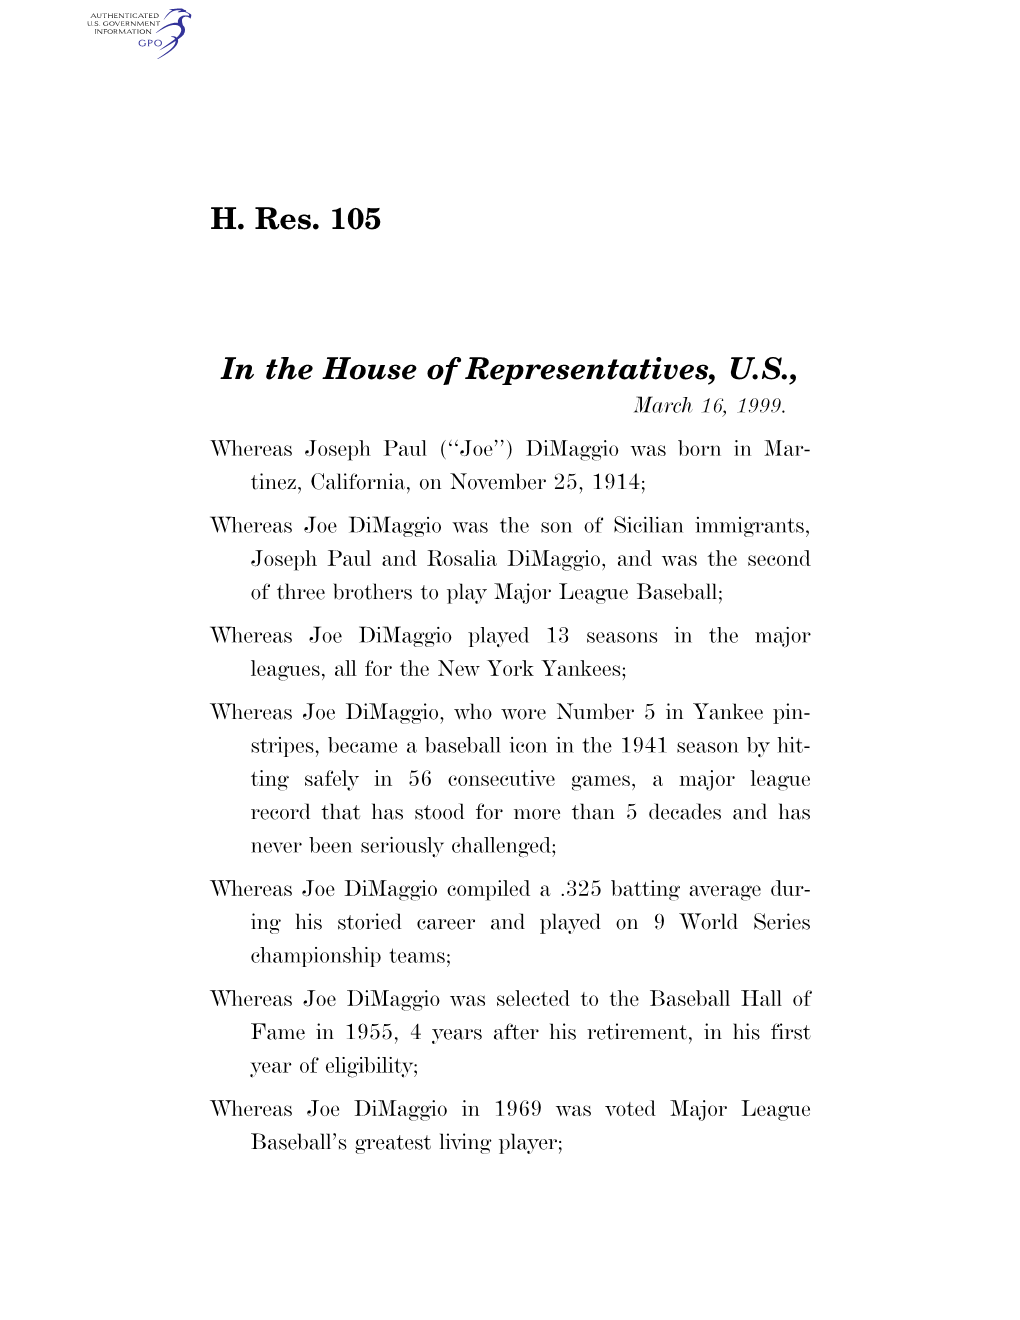 H. Res. 105 in the House of Representatives, U.S